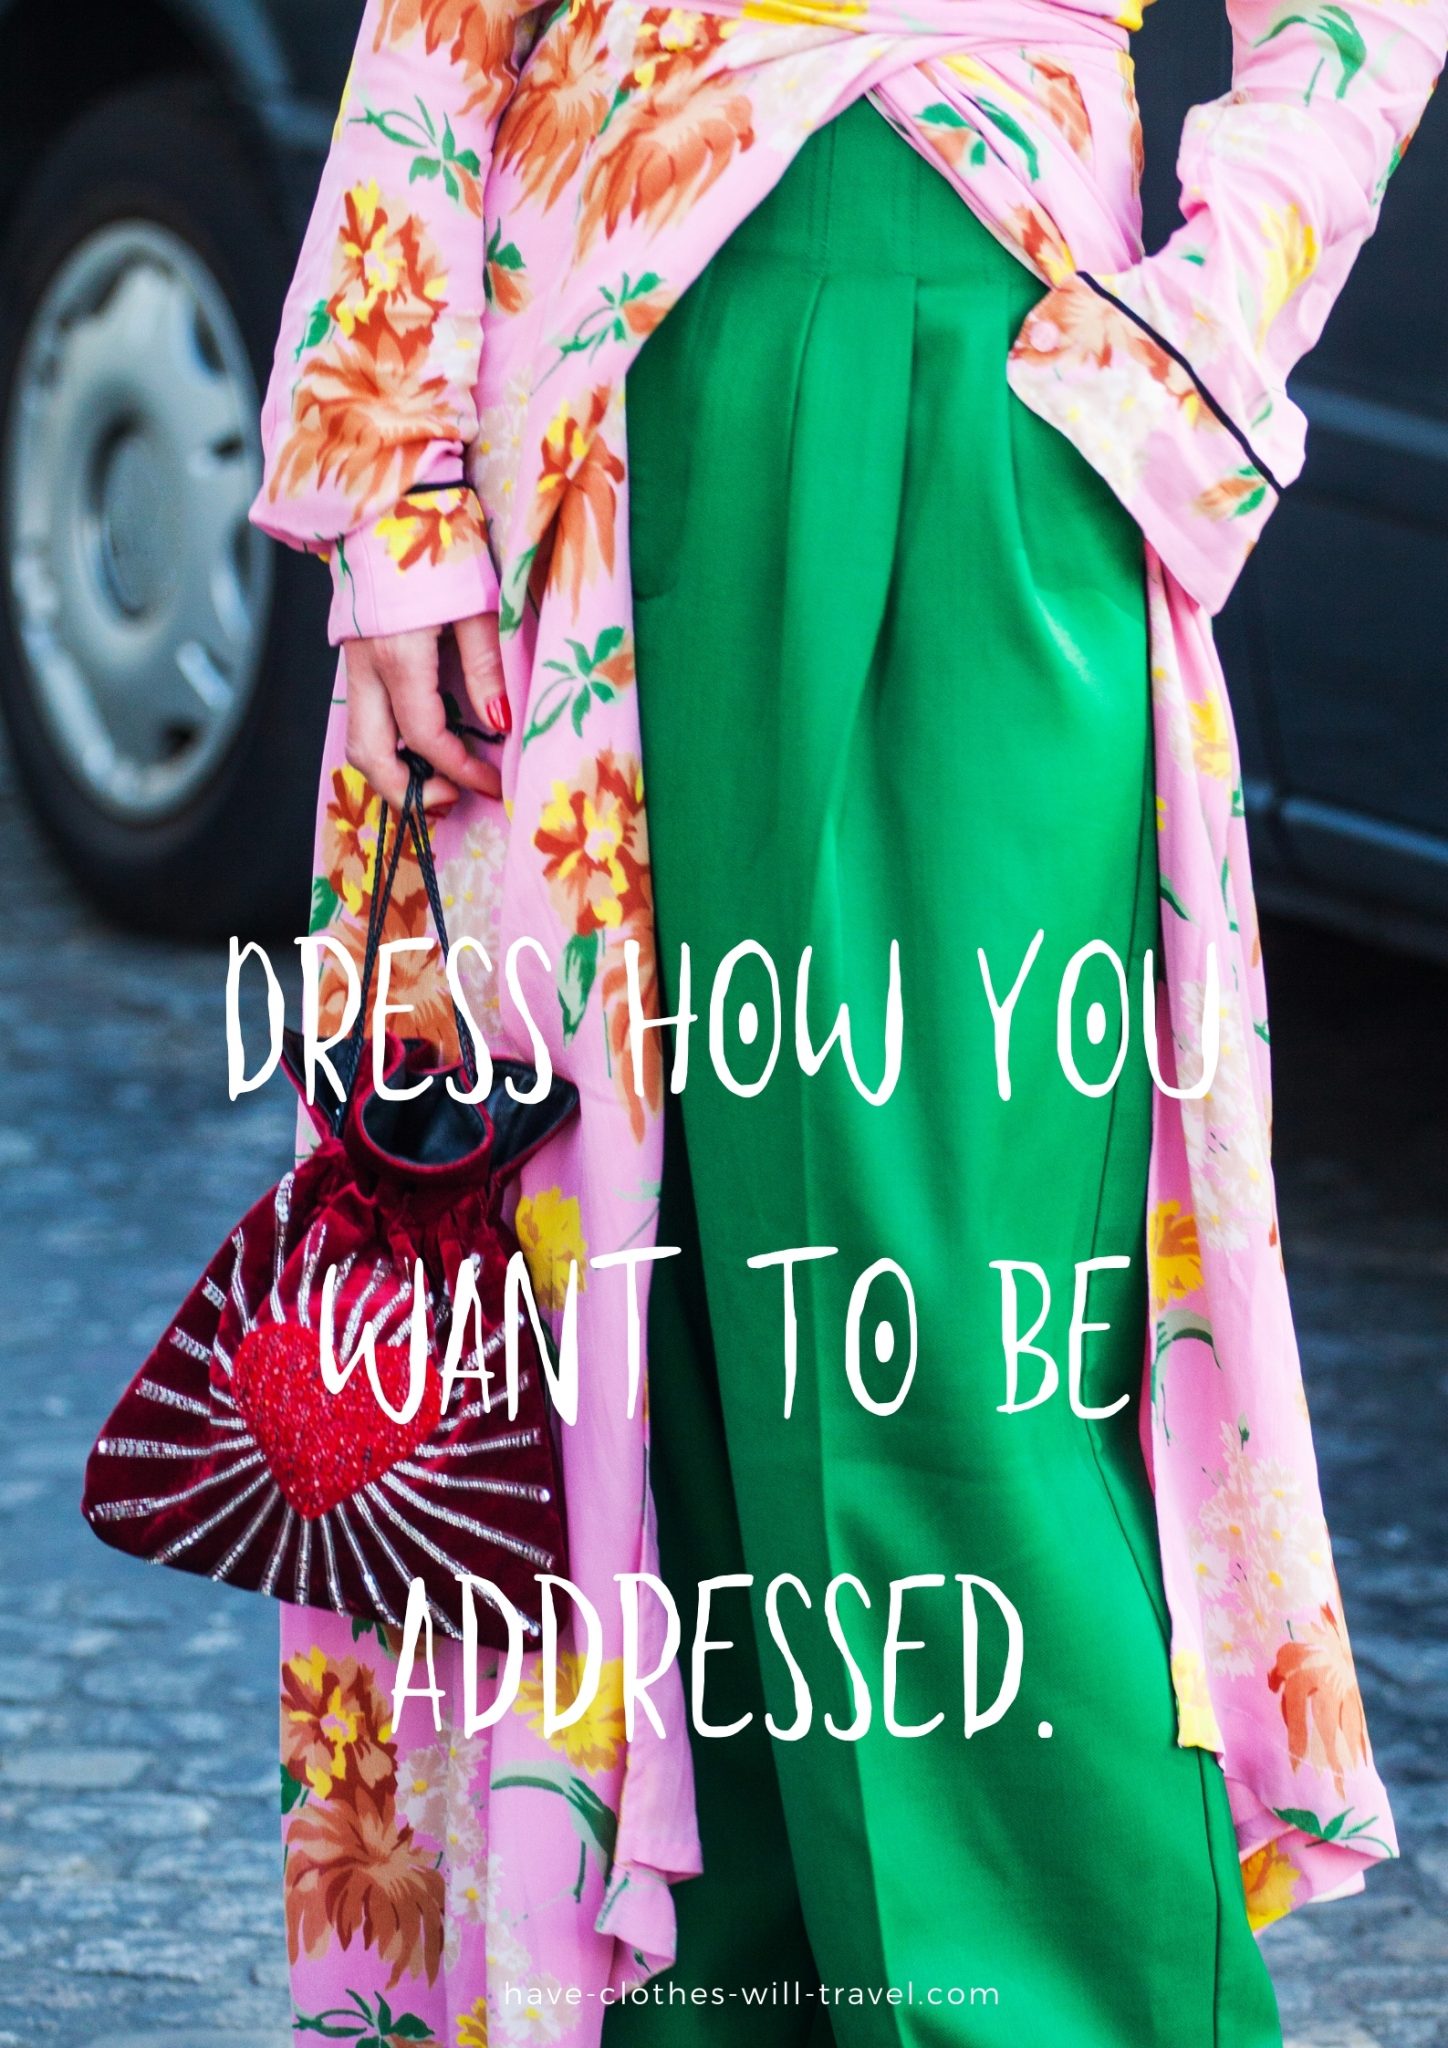 A photo of a woman's lower body, showing a colorful pink and orange floral dress paired with bright green pants and a flashy red statement handbag. White text over the image says, "Dress how you want to be addressed."